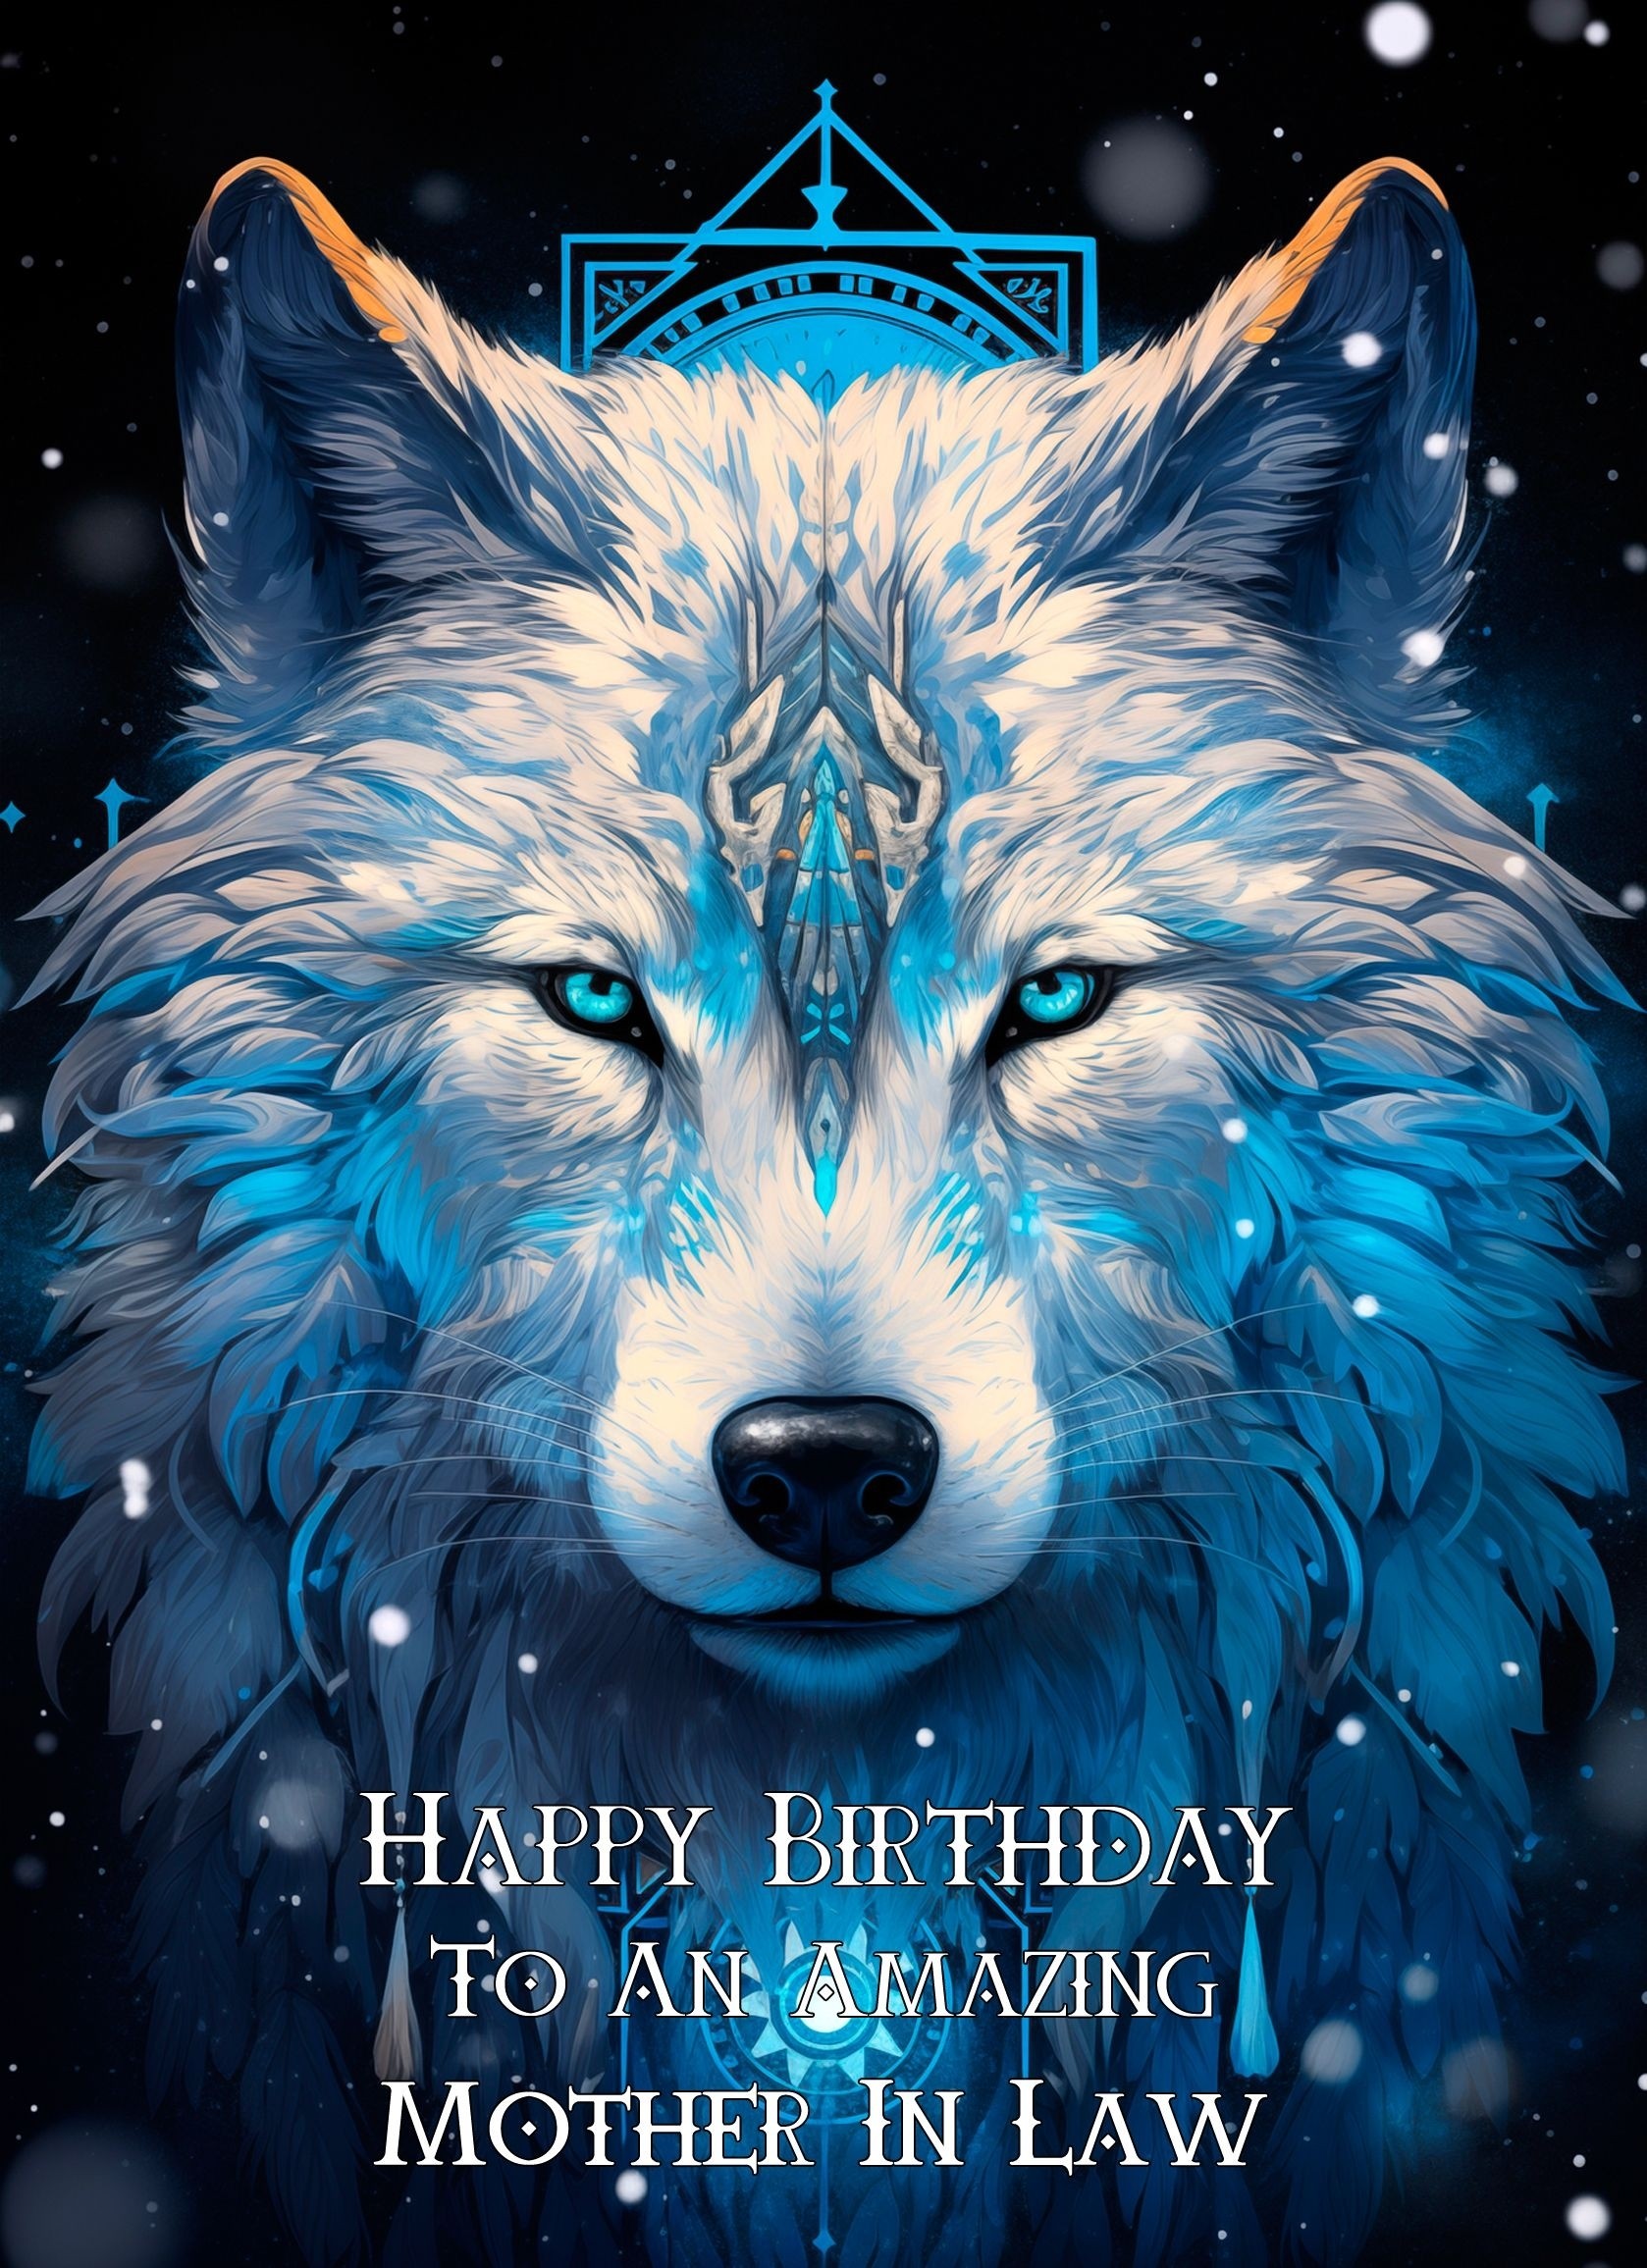 Tribal Wolf Art Birthday Card For Mother in Law (Design 2)